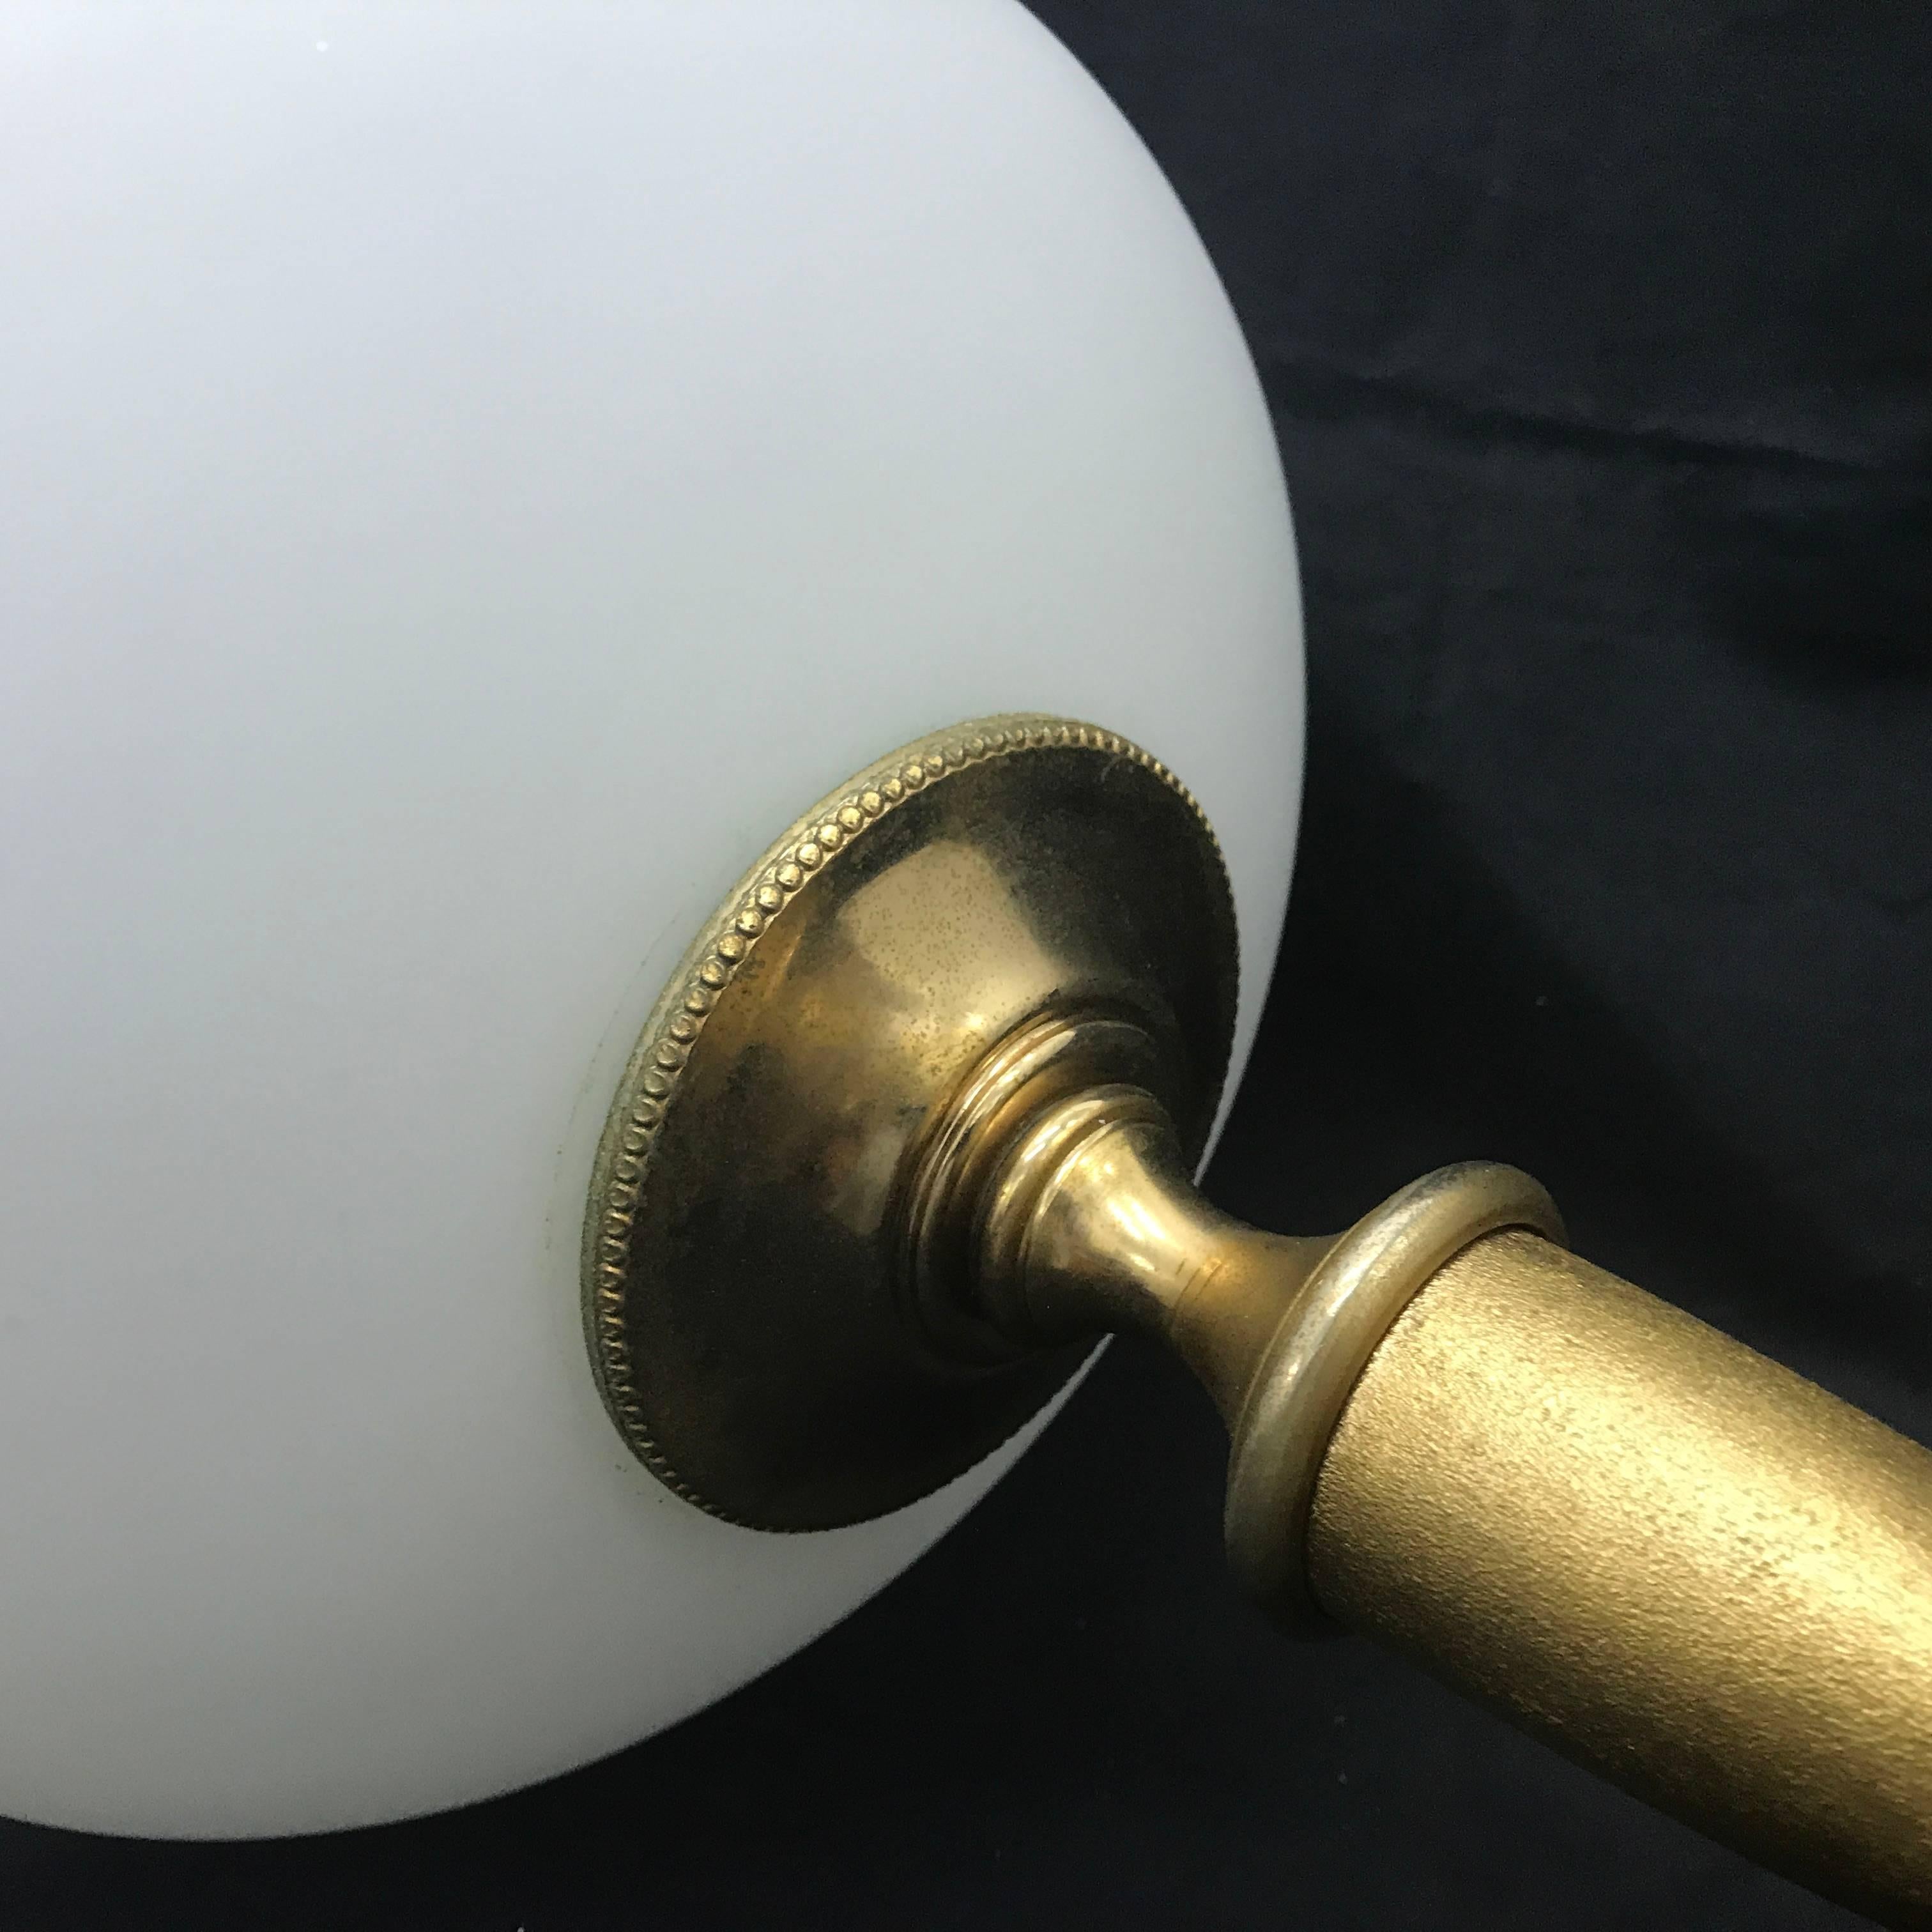 Amazing table lamp, design it's attributed to Guglielmo Ulrich for F.I.L.C. Milano, golden metal and milk glass, original conditions. Fully restored electrical parts, it works 110-240 volts and needs a regular e27 bulb. Made in 1950, it's labeled on